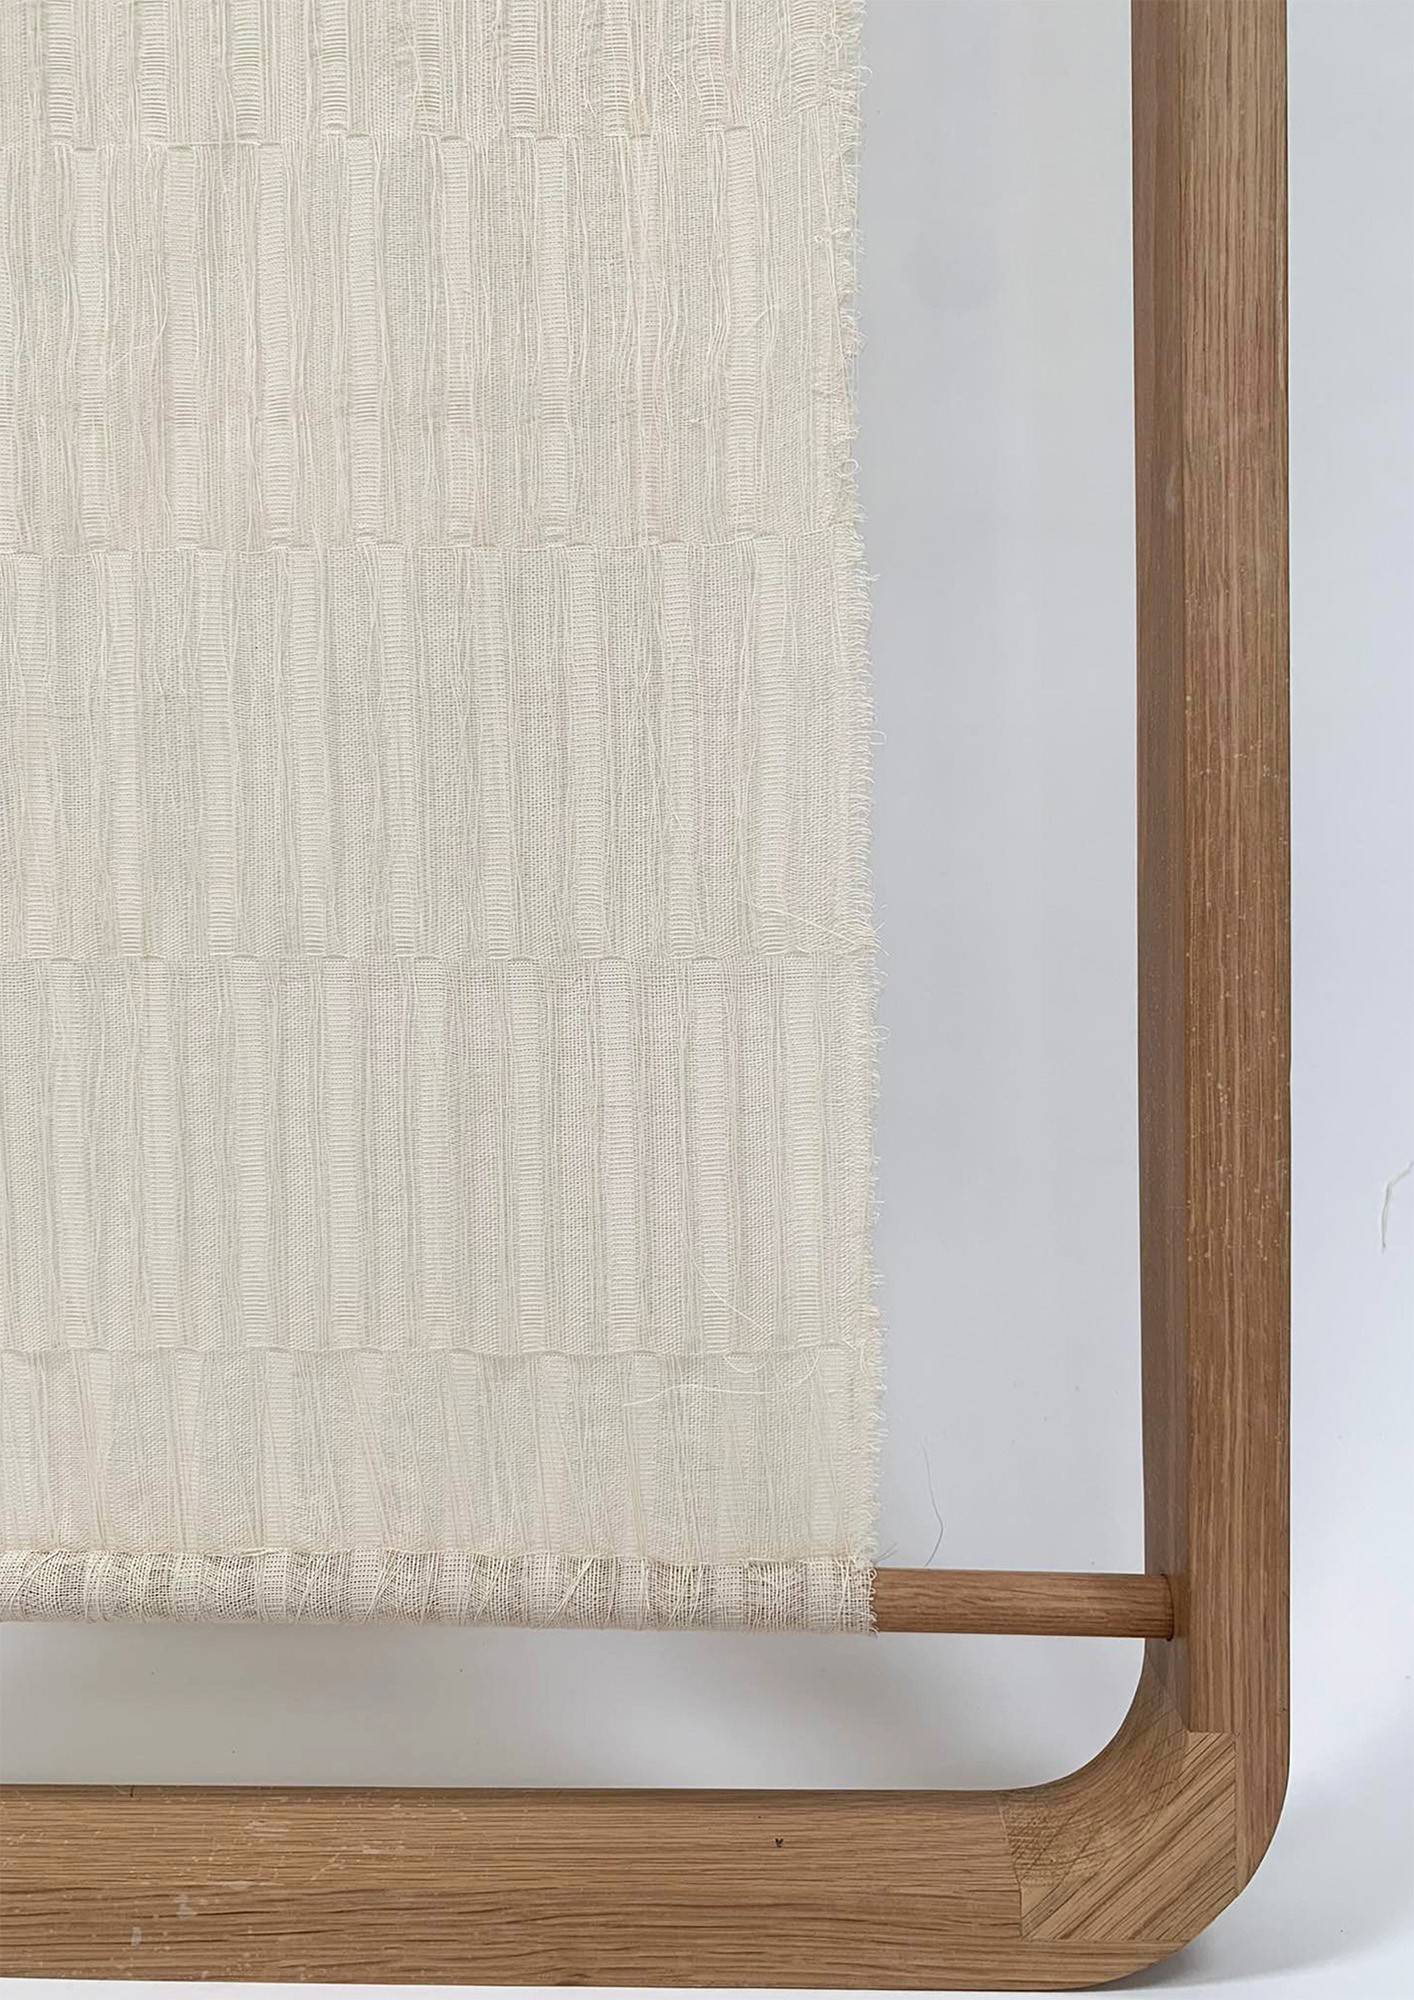 *Deerpark*, woven piece made from paper and wool, mounted onto white oak divider